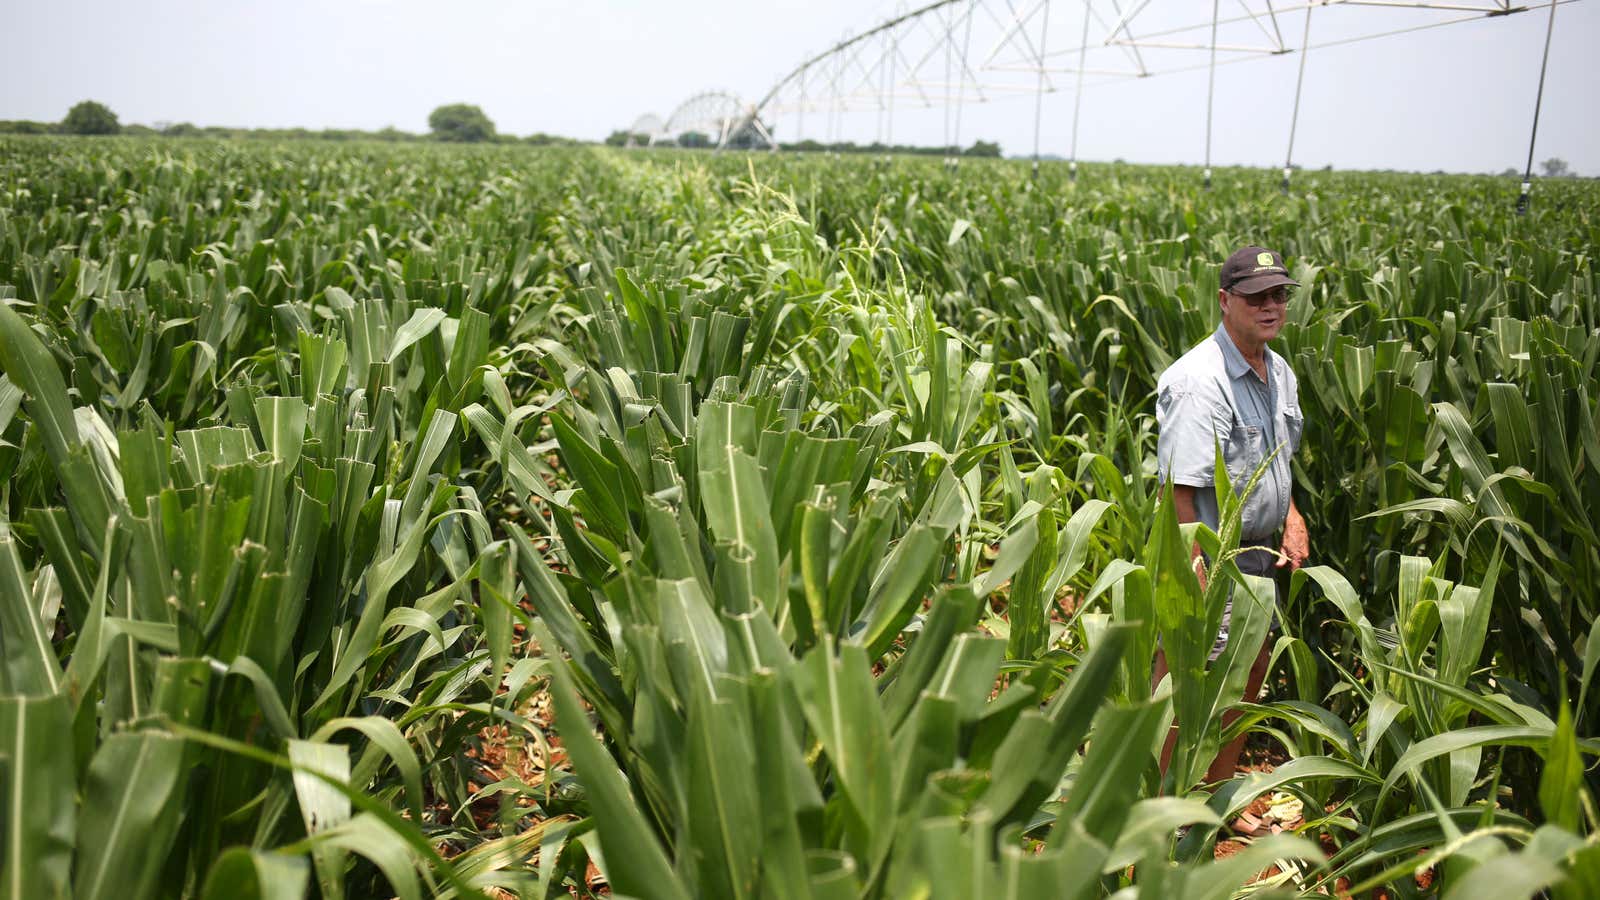 A South African farmer inspects his crop.